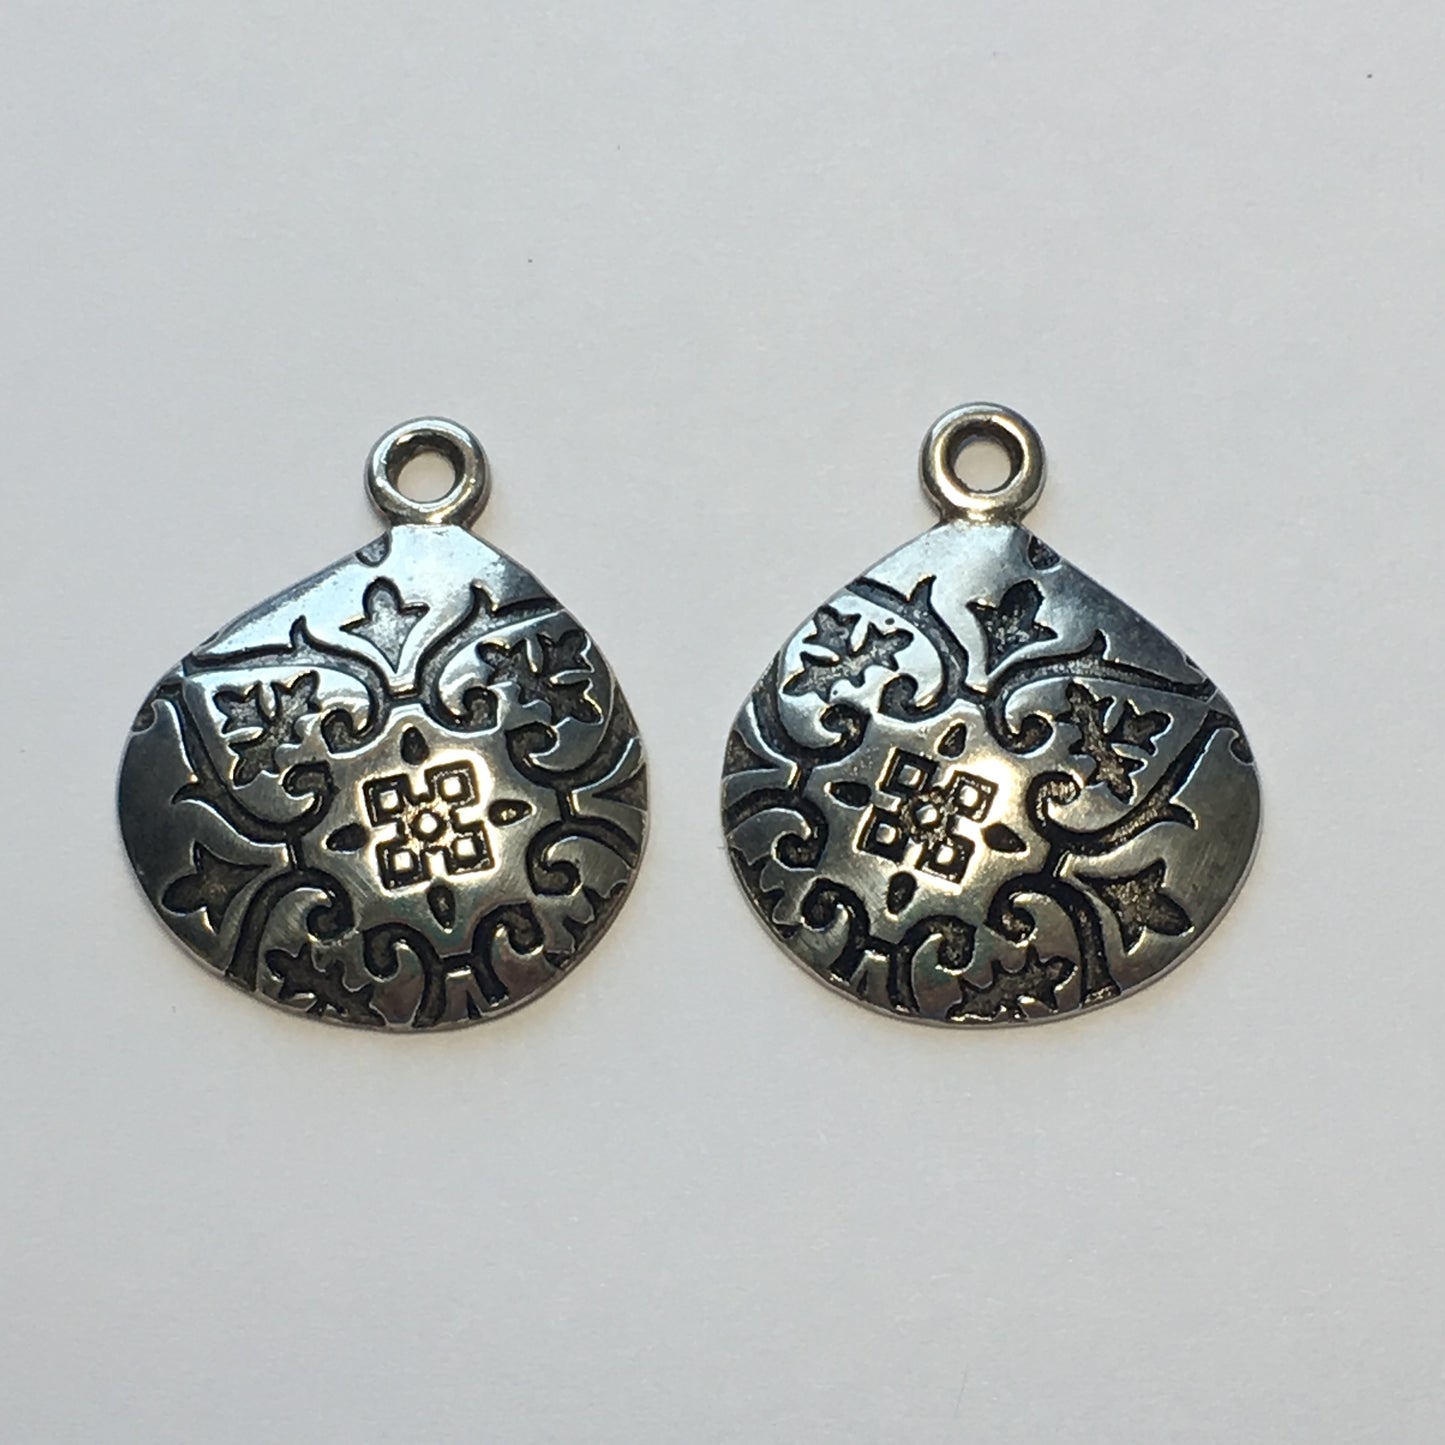 Antique Silver Plated Printed Offset Teardrop Earring Component or Pendants, 27 x 22 mm - 2 Pieces